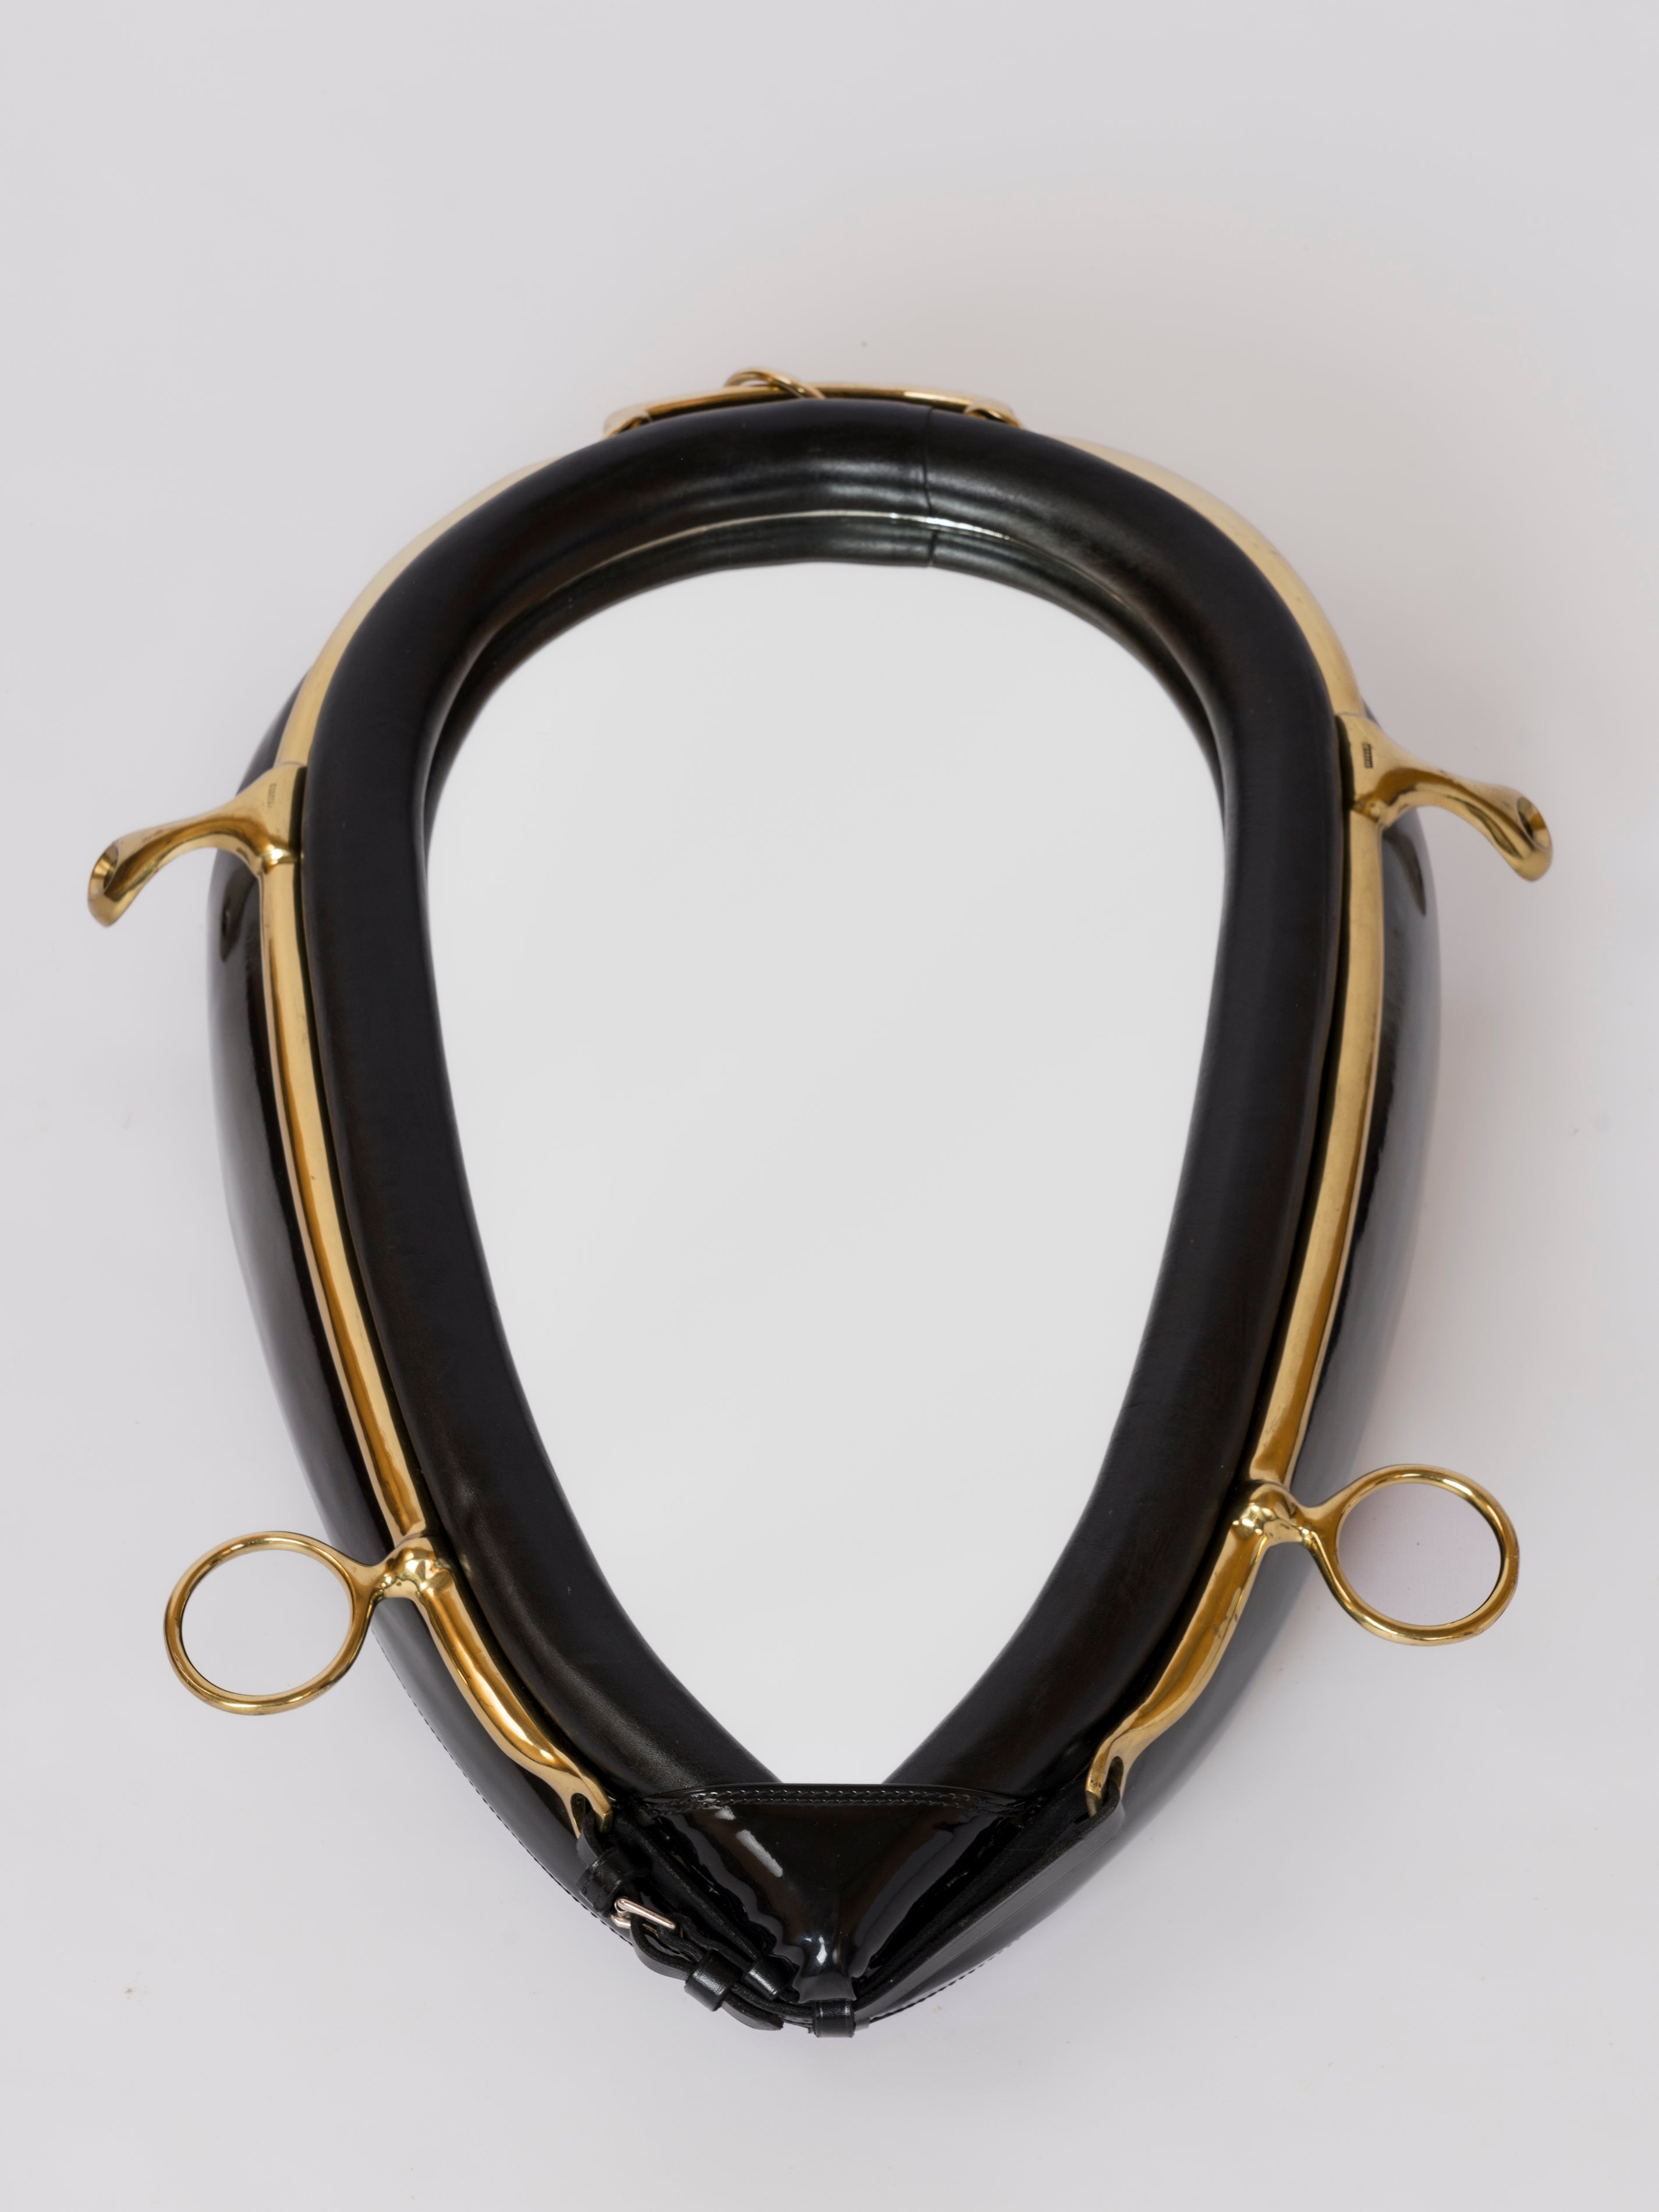 Hermès style black faux leather equestrian theme wall mirror with brass strapping and trimmings.
Belt and buckle present at bottom end of the mirror.
In good vintage condition. Patina on brass.
This mirror will ship from France and can be returned